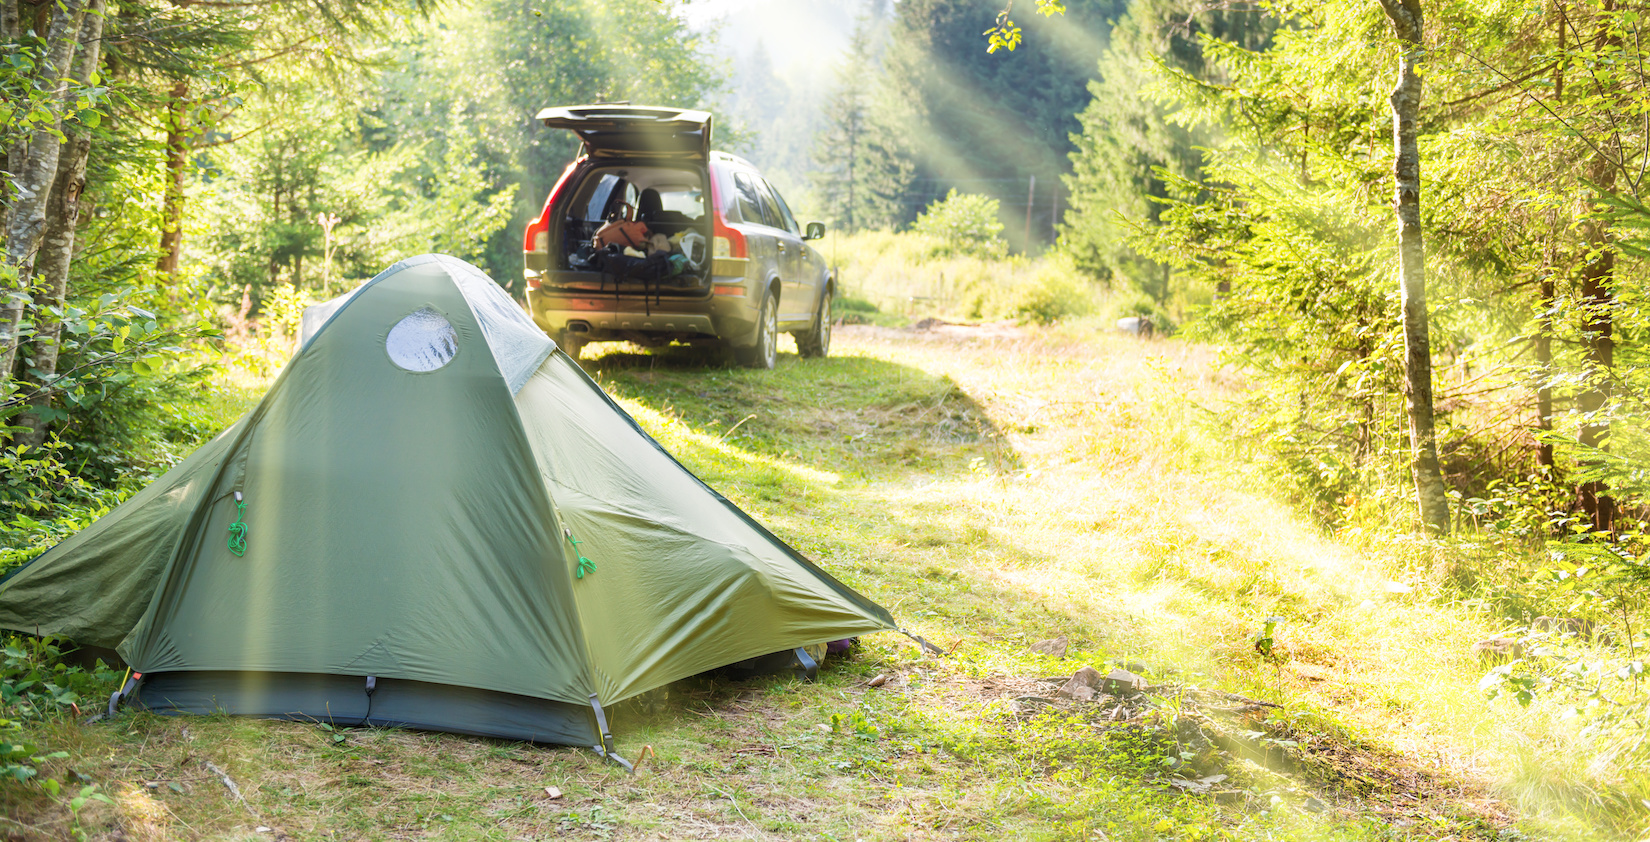 Set up tent in front of a car with its trunk open